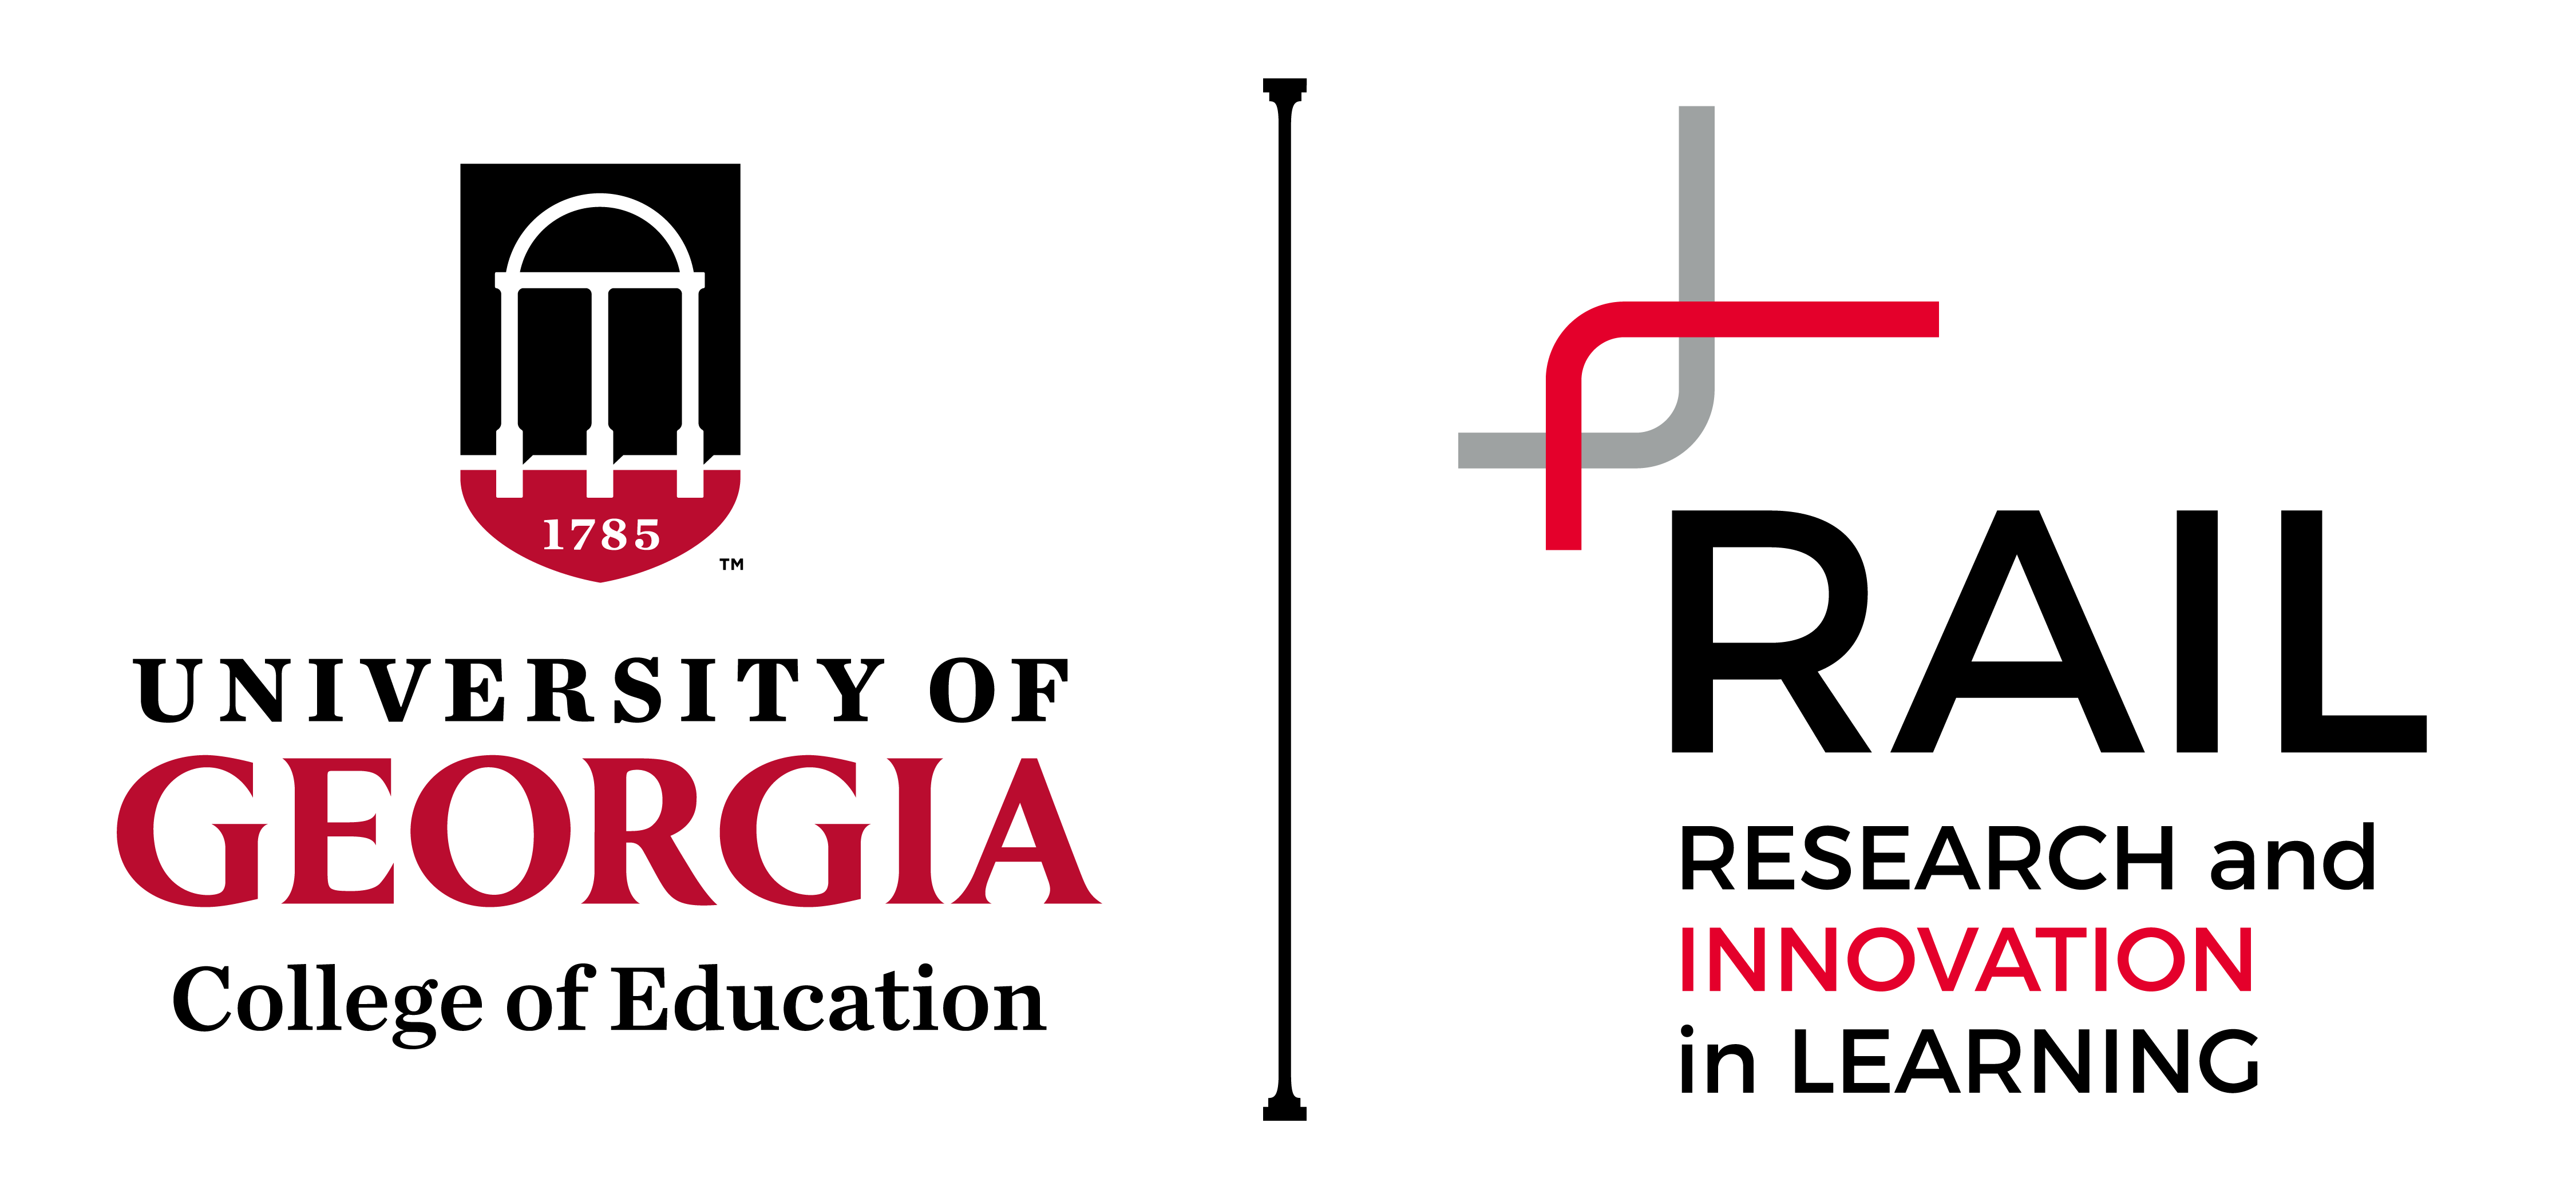 UGA Research and Innovation in Learning